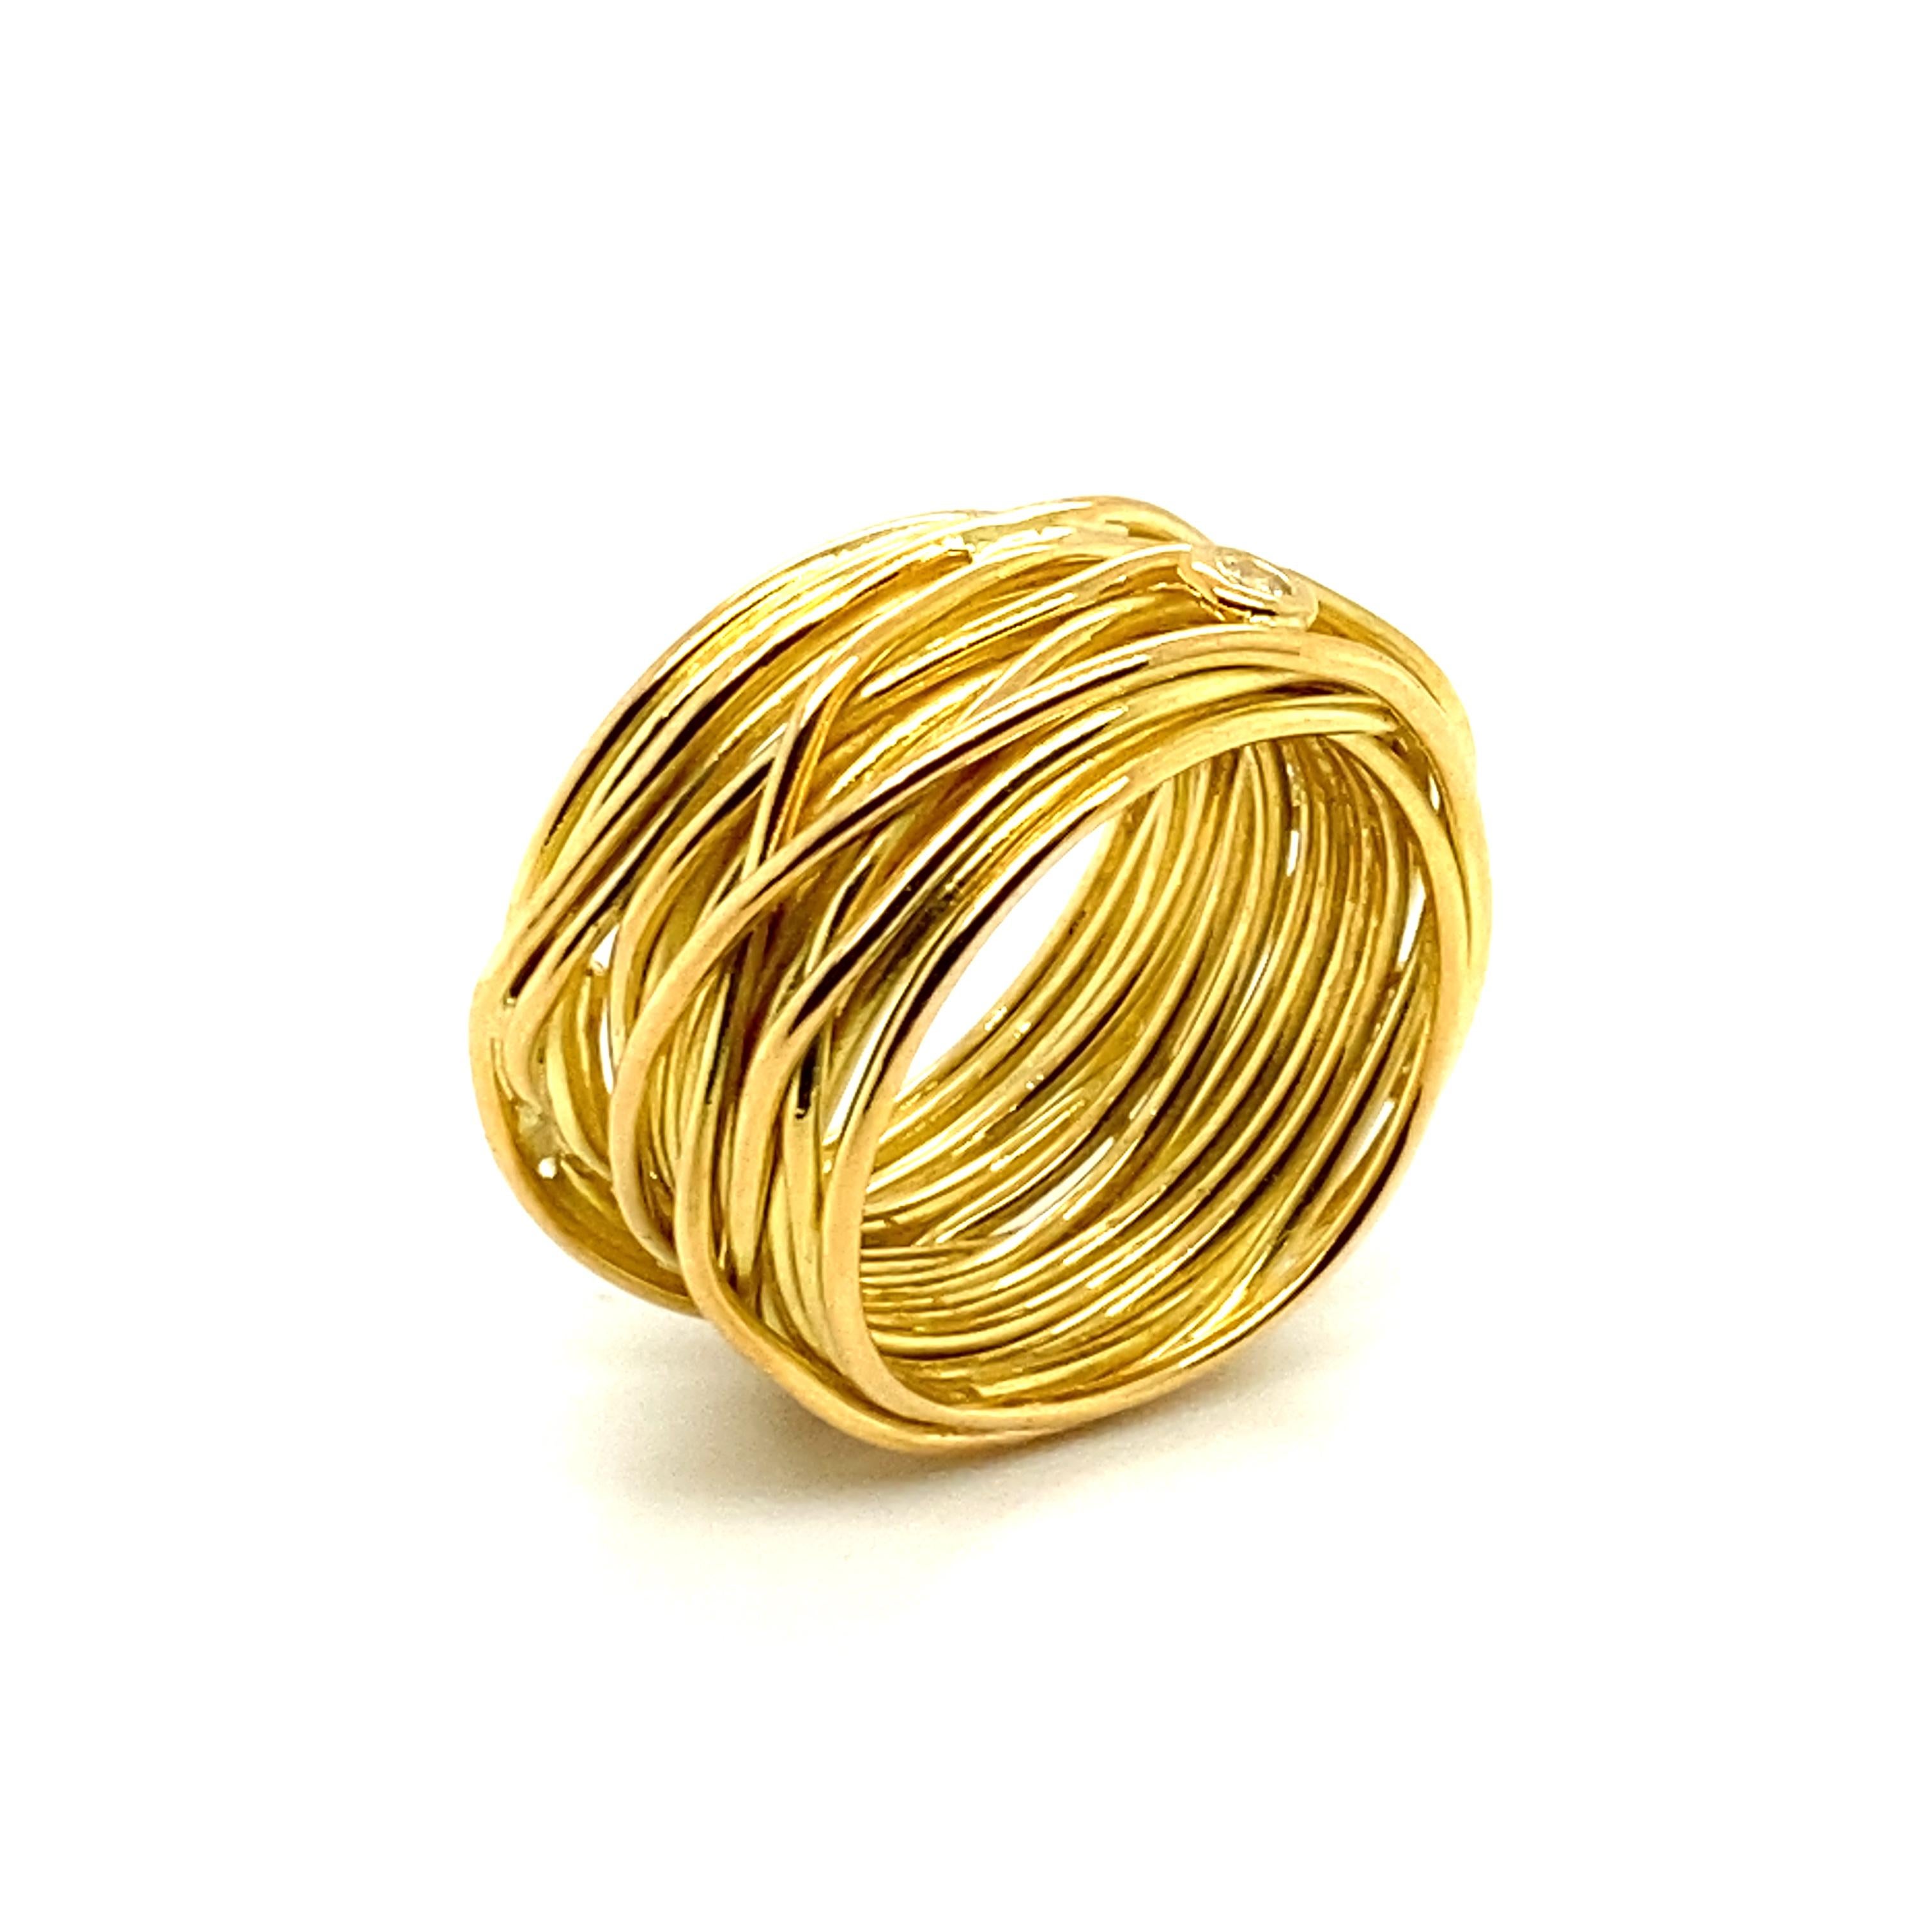 Contemporary Iconic Diamond Bird's Nest Ring by Devon in 18 Karat Yellow Gold For Sale